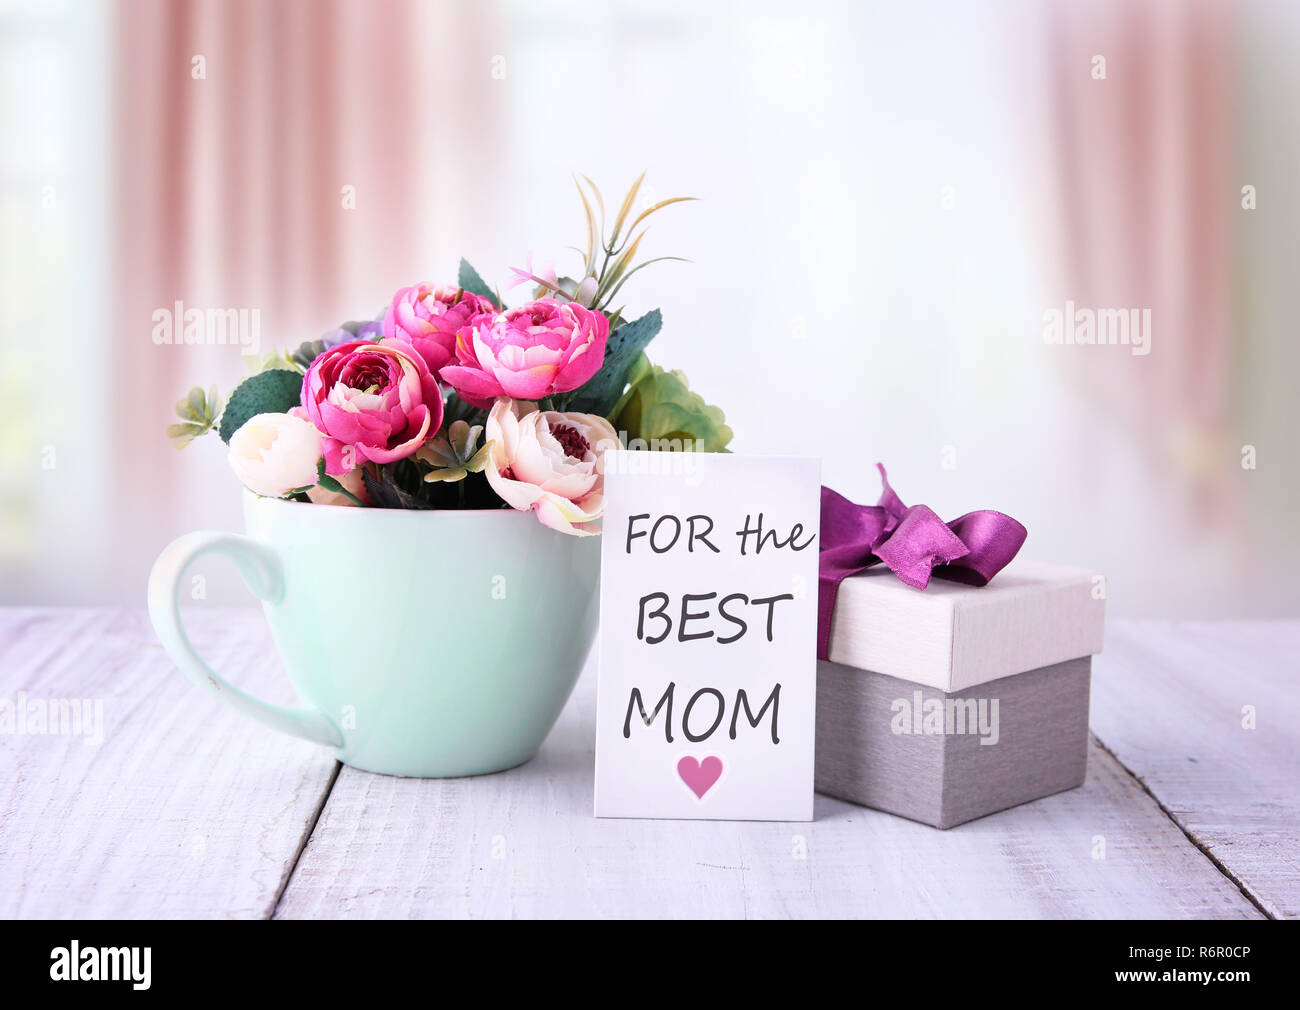 mother's day greeting card. flowers and gift box. Stock Photo